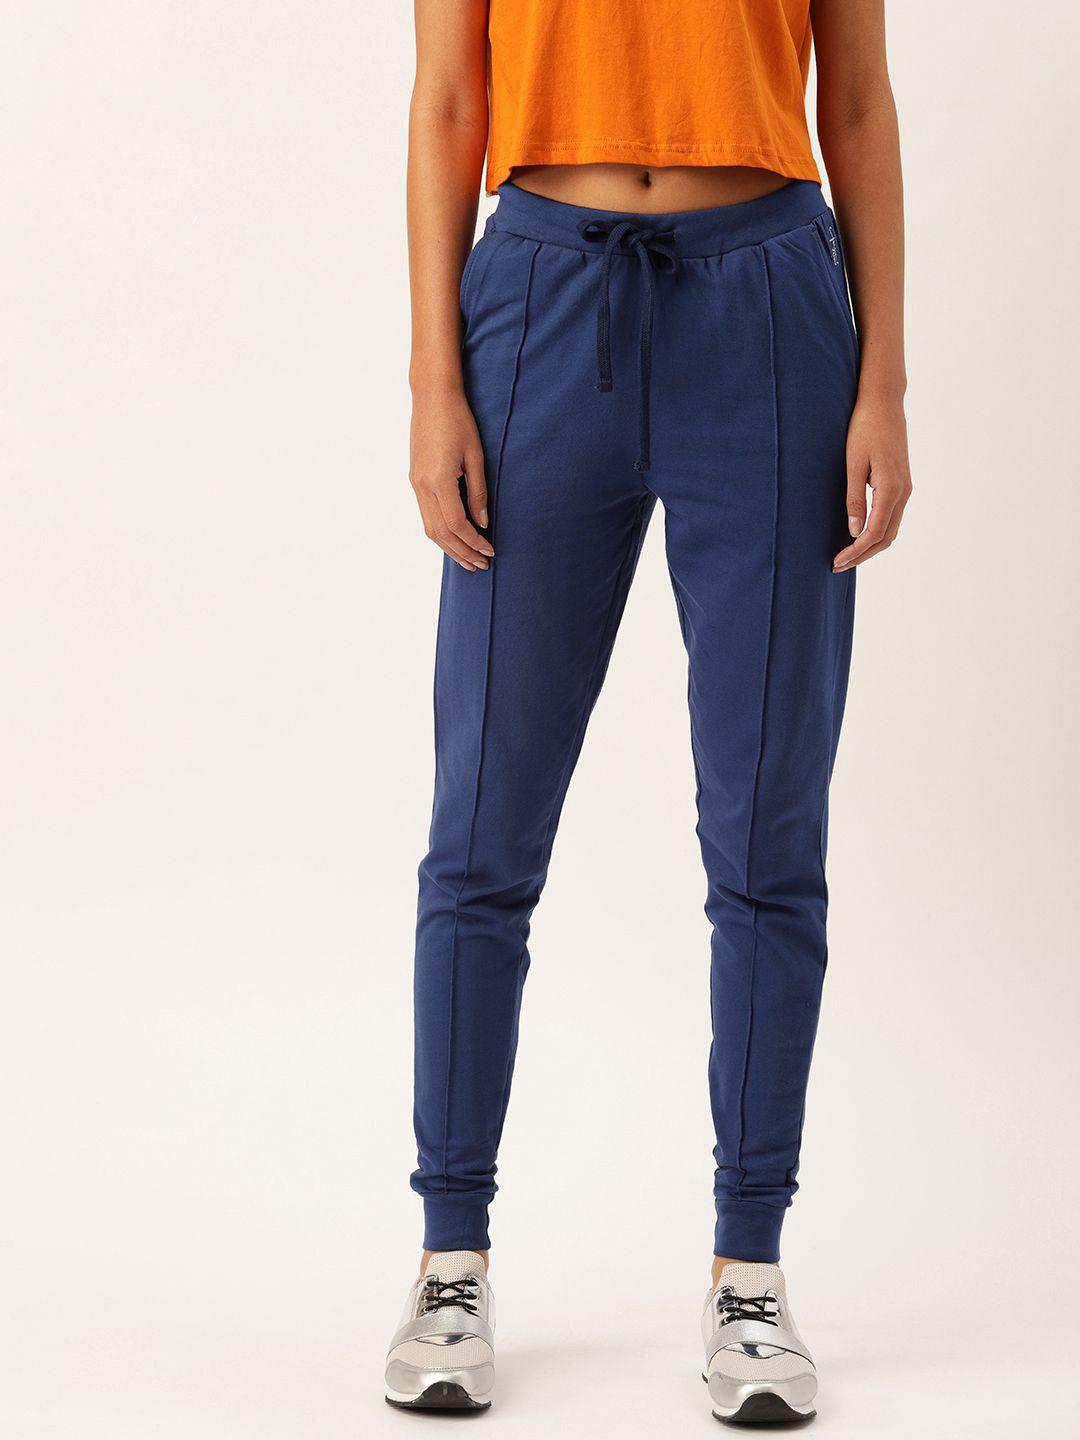 flying-machine-women-navy-blue-solid-joggers